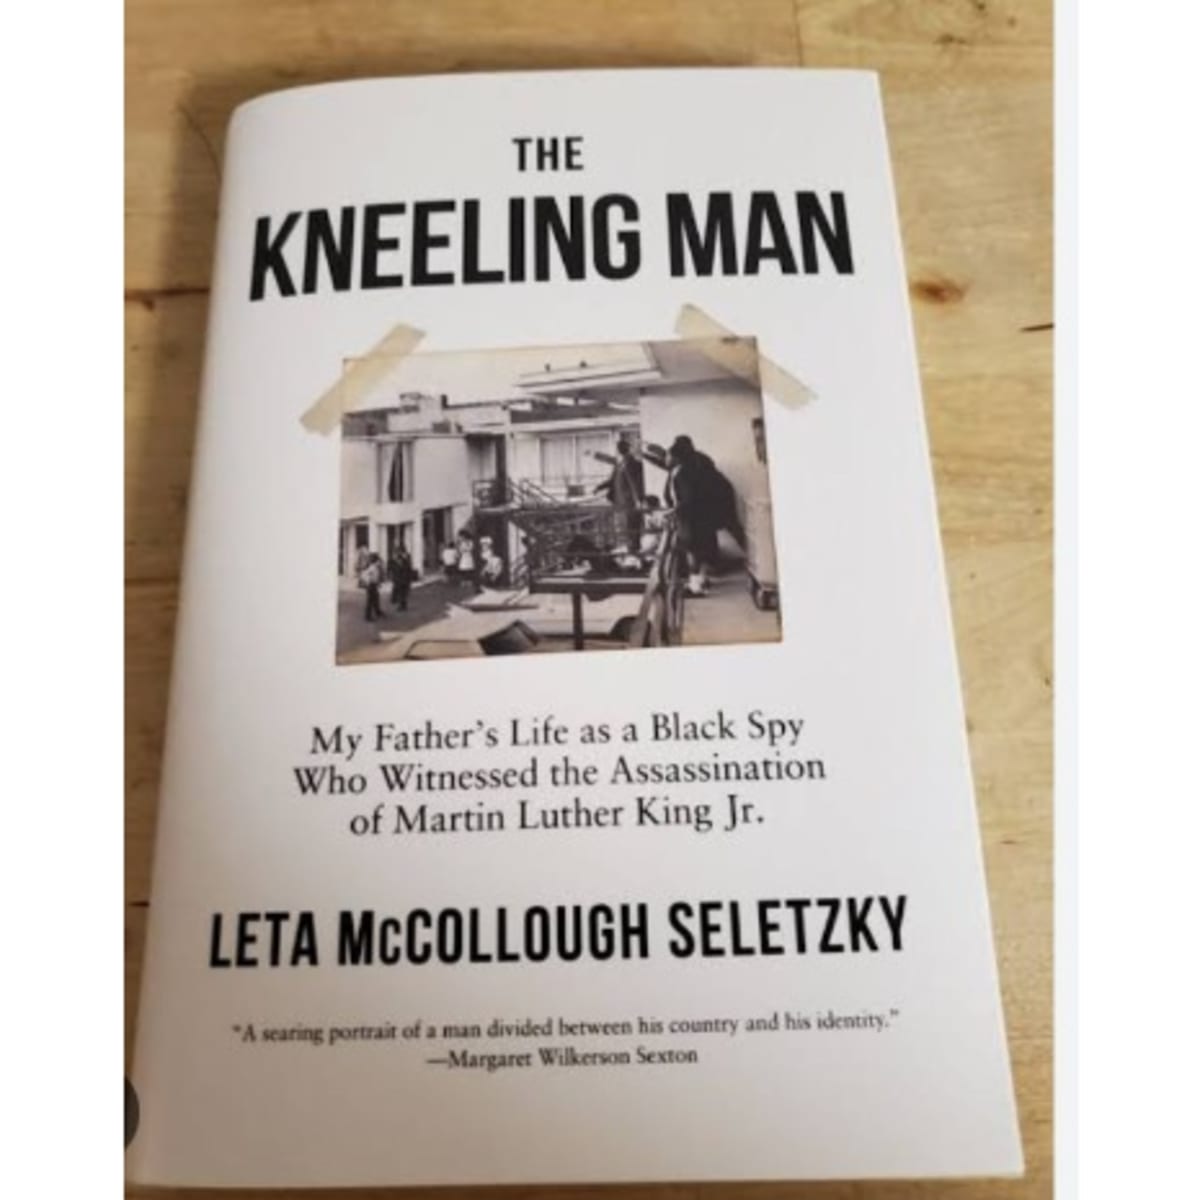 The Kneeling Man: My Father's Life as a Black Spy Who Witnessed